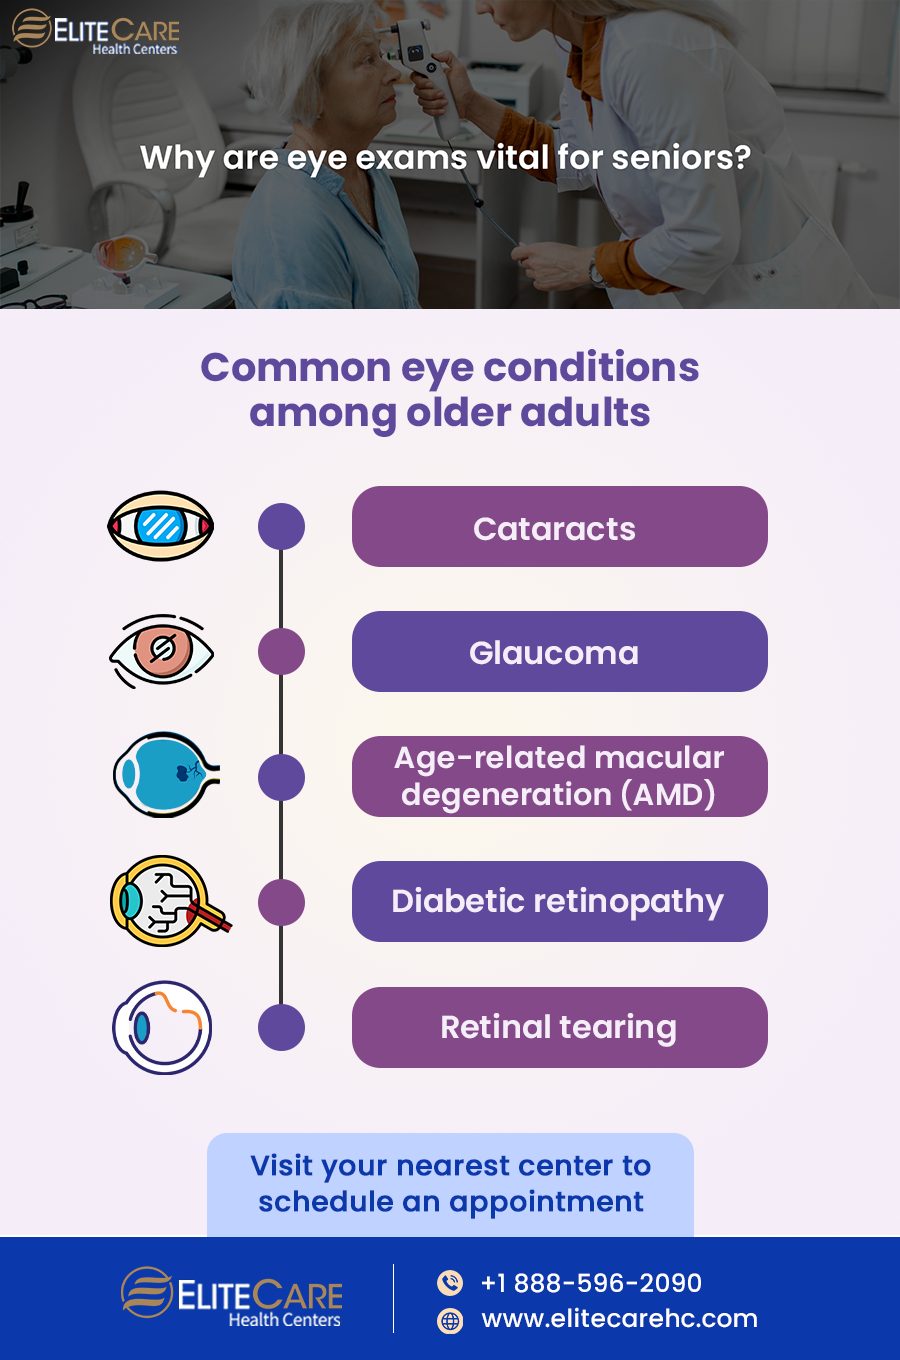 Why Are Eye Exams Vital for Seniors? | Infographic